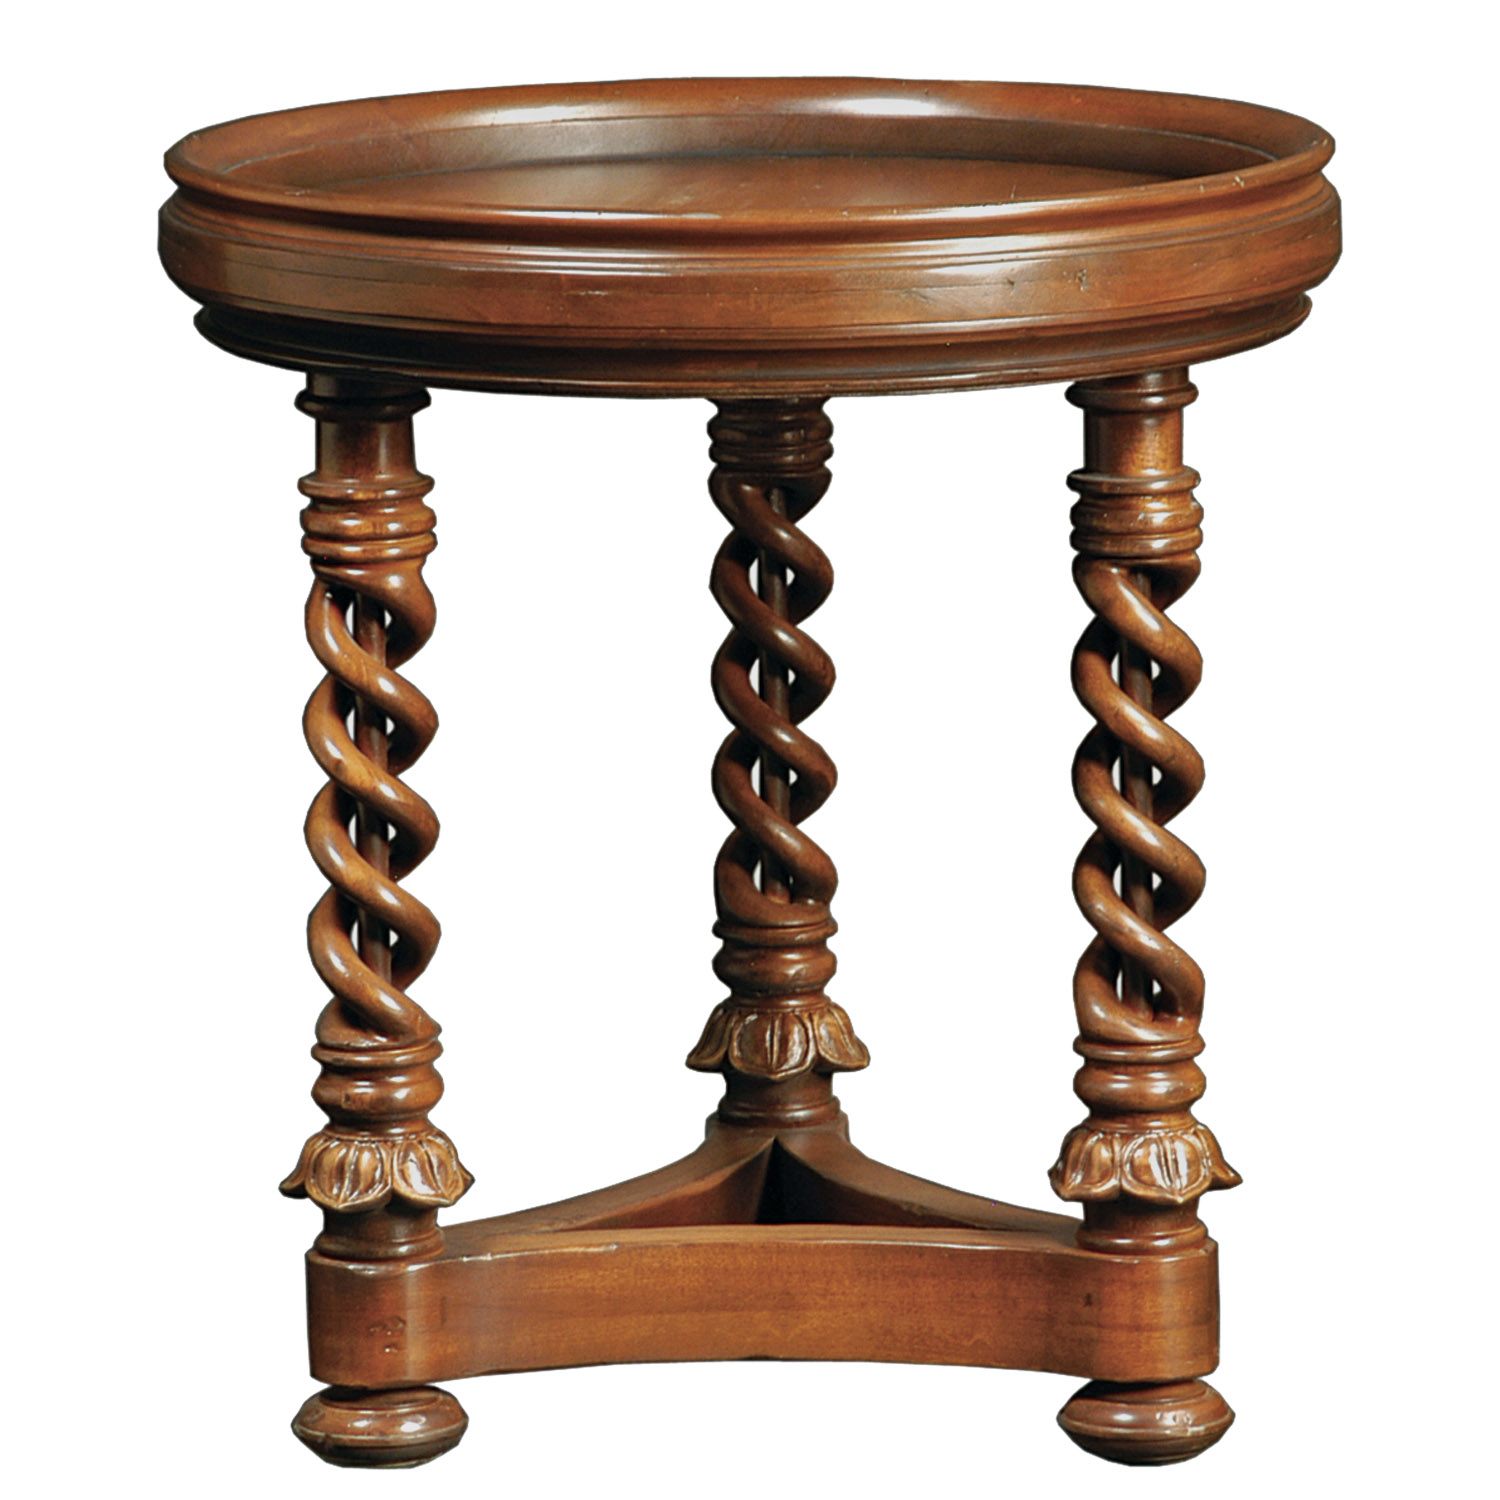 Admont traditional side end table with spindle turned legs by Woodland furniture in Idaho Falls USA